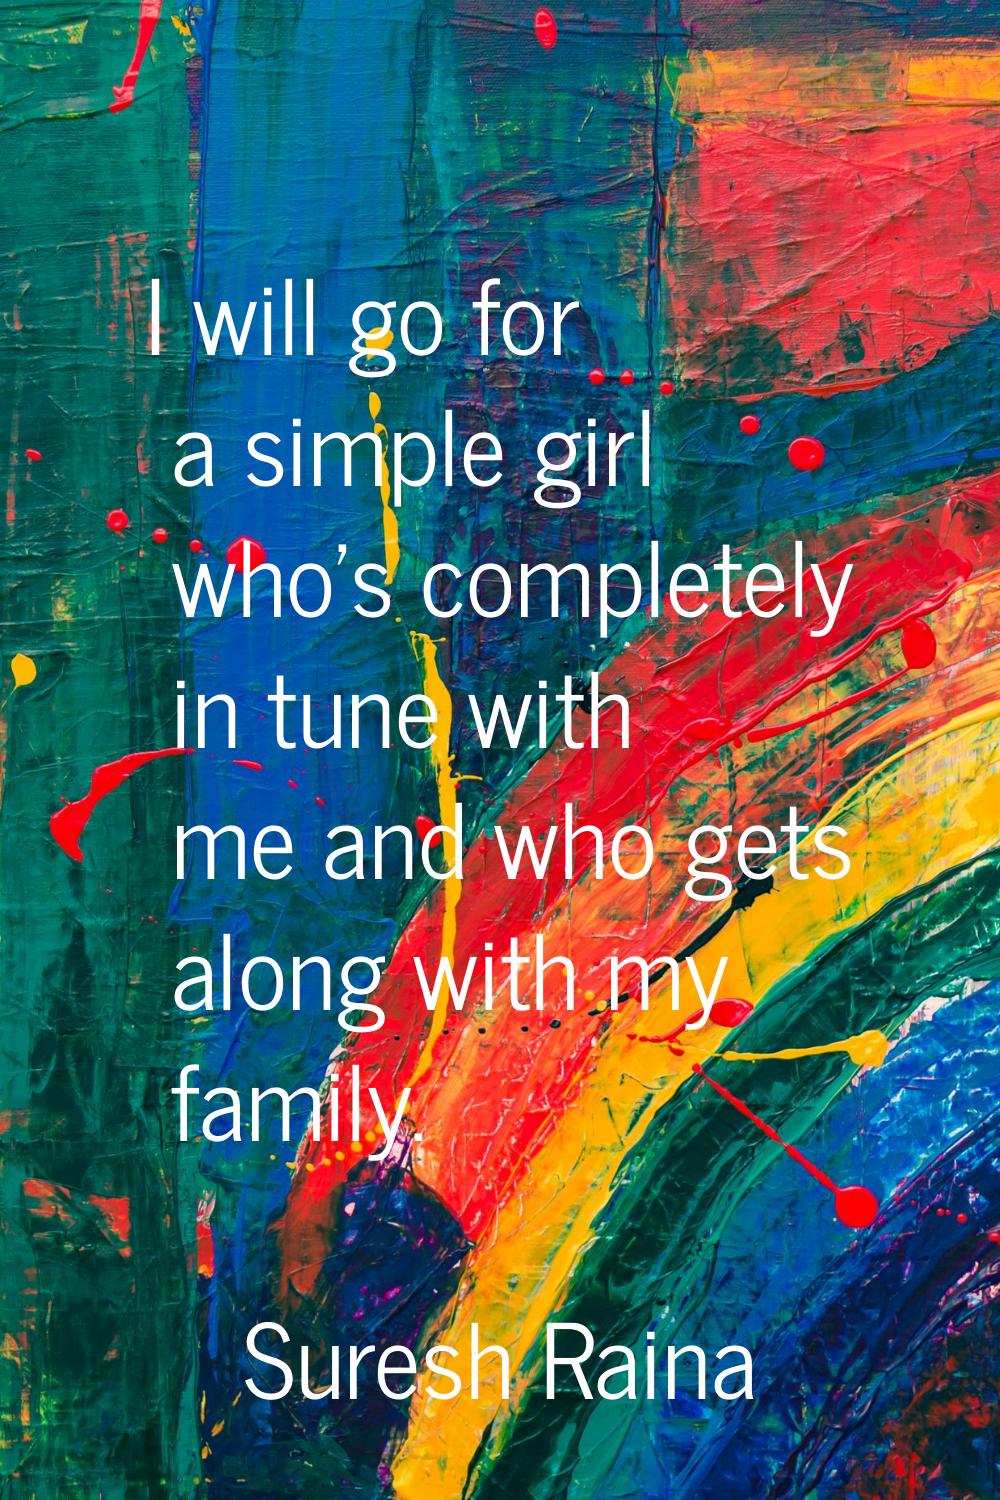 I will go for a simple girl who's completely in tune with me and who gets along with my family.